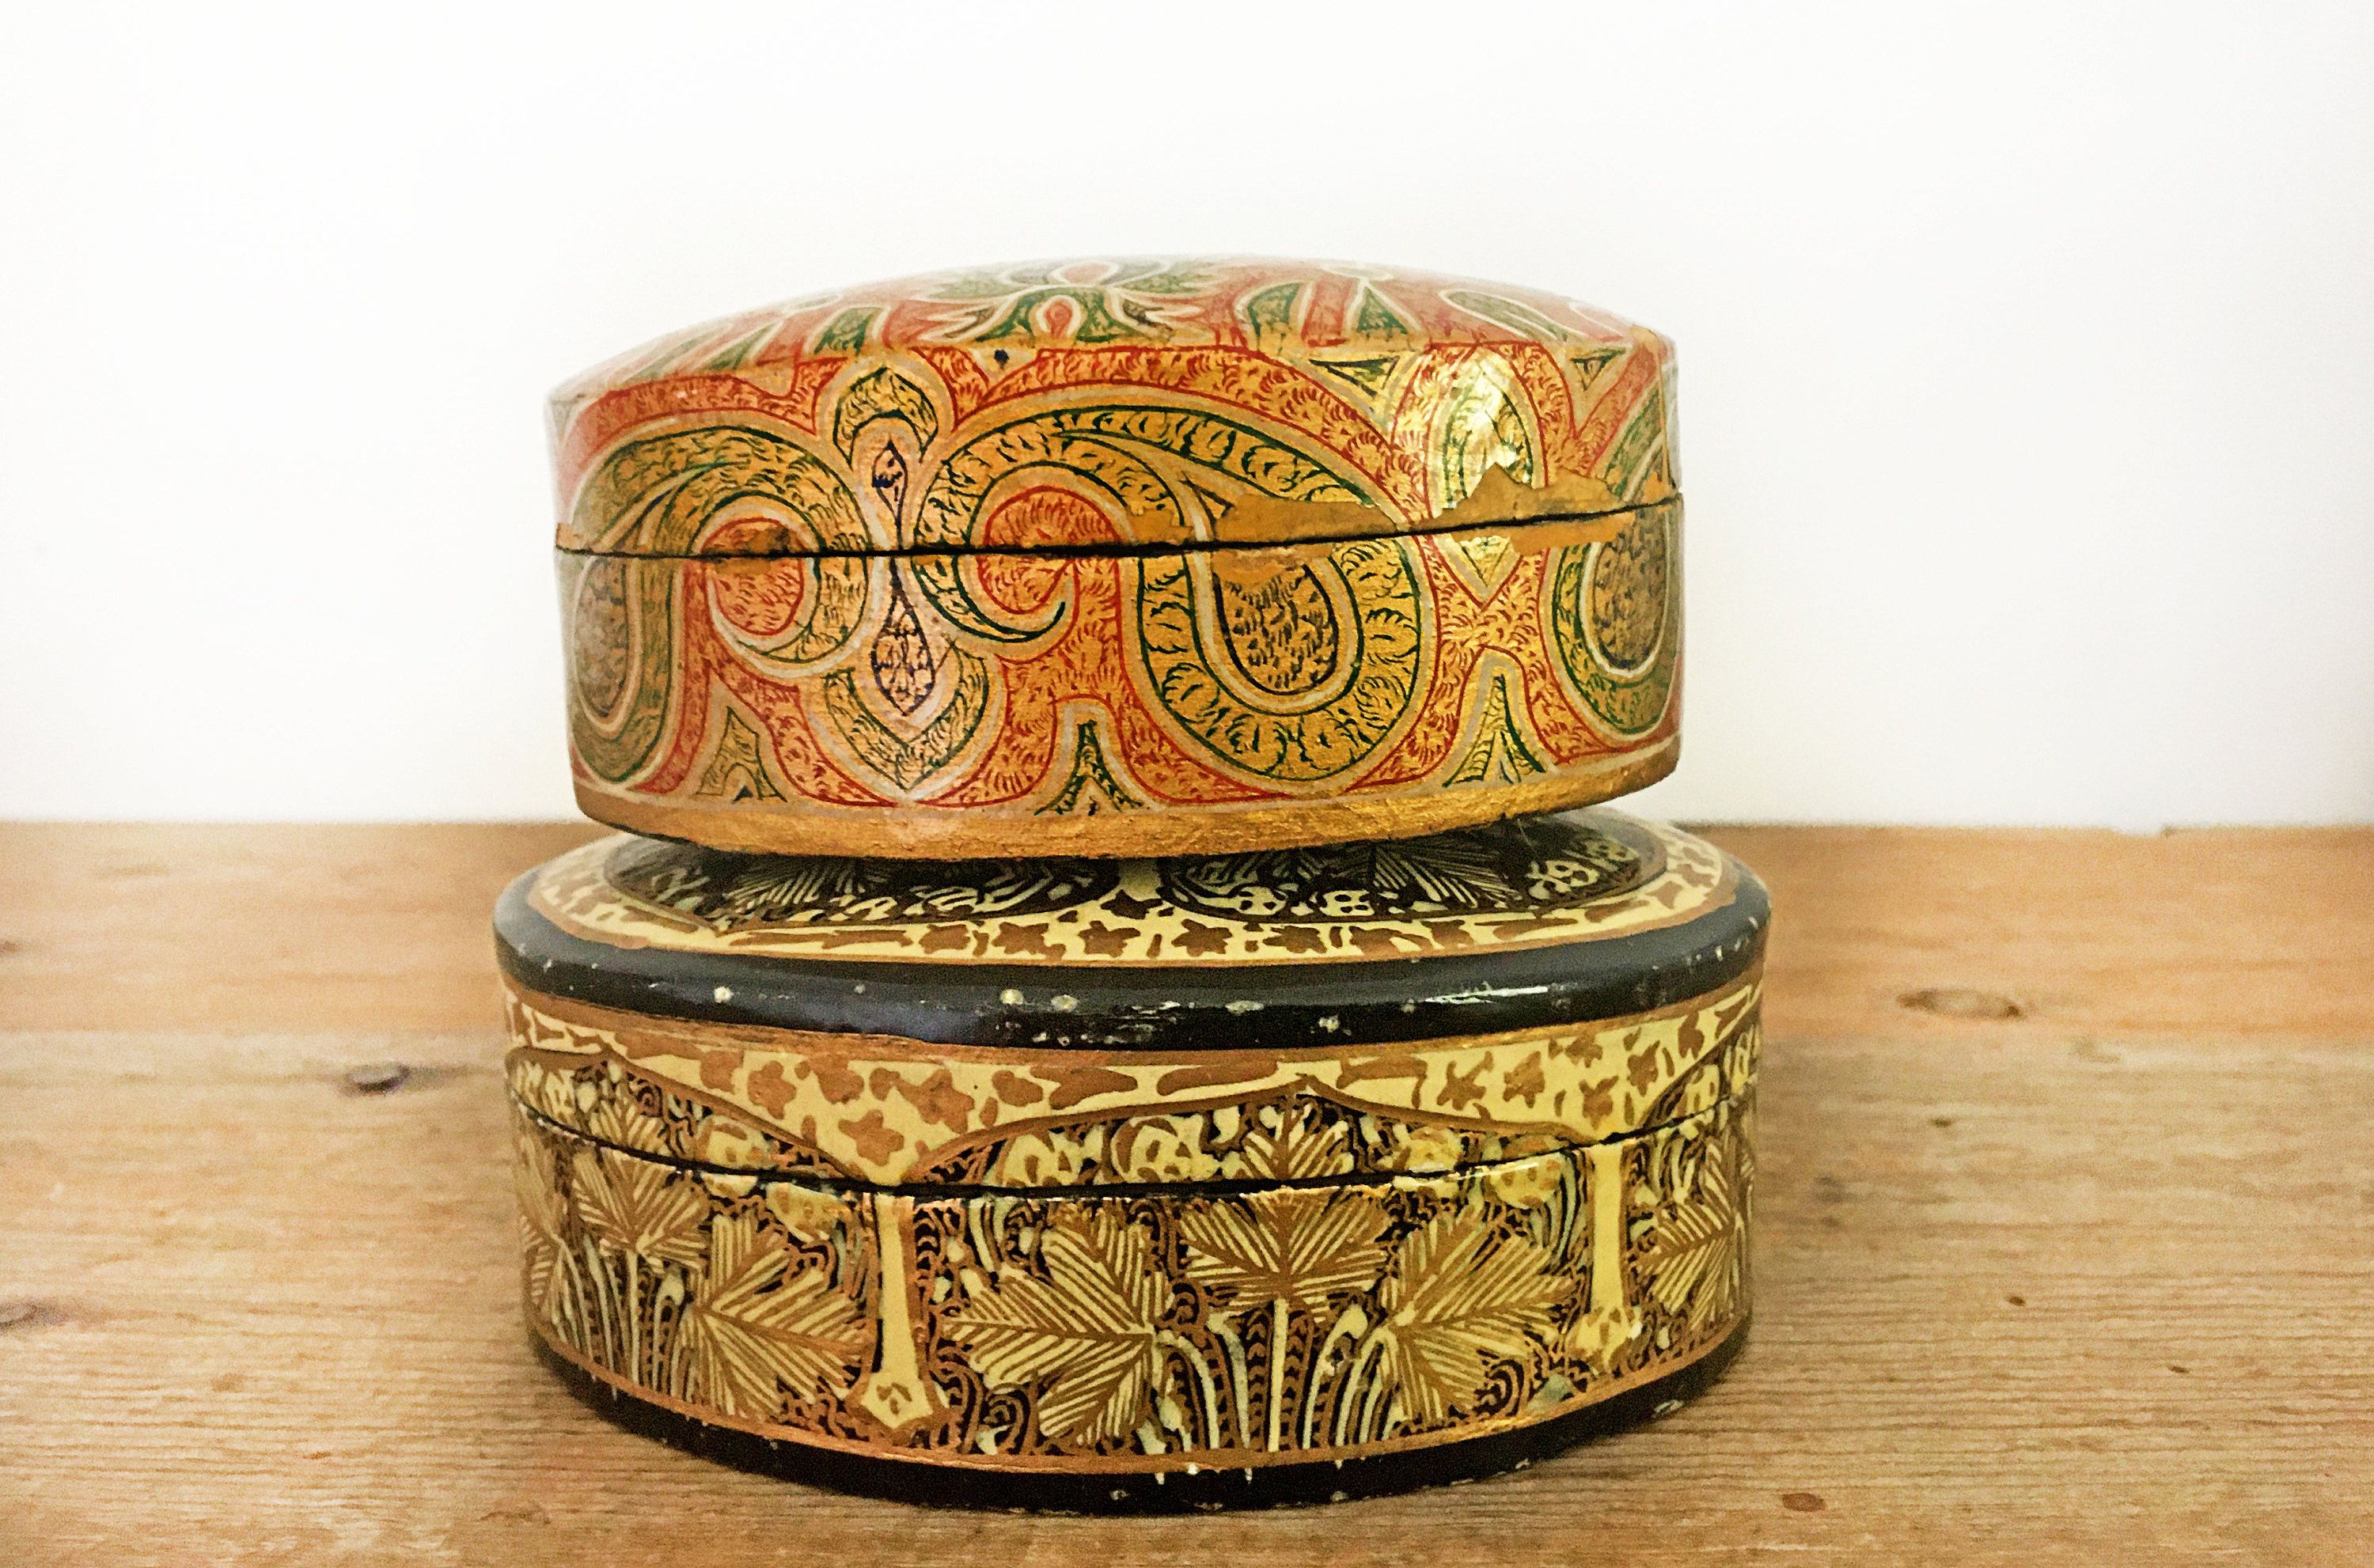 DIY Lacquer decorative boxes - Four Generations One Roof